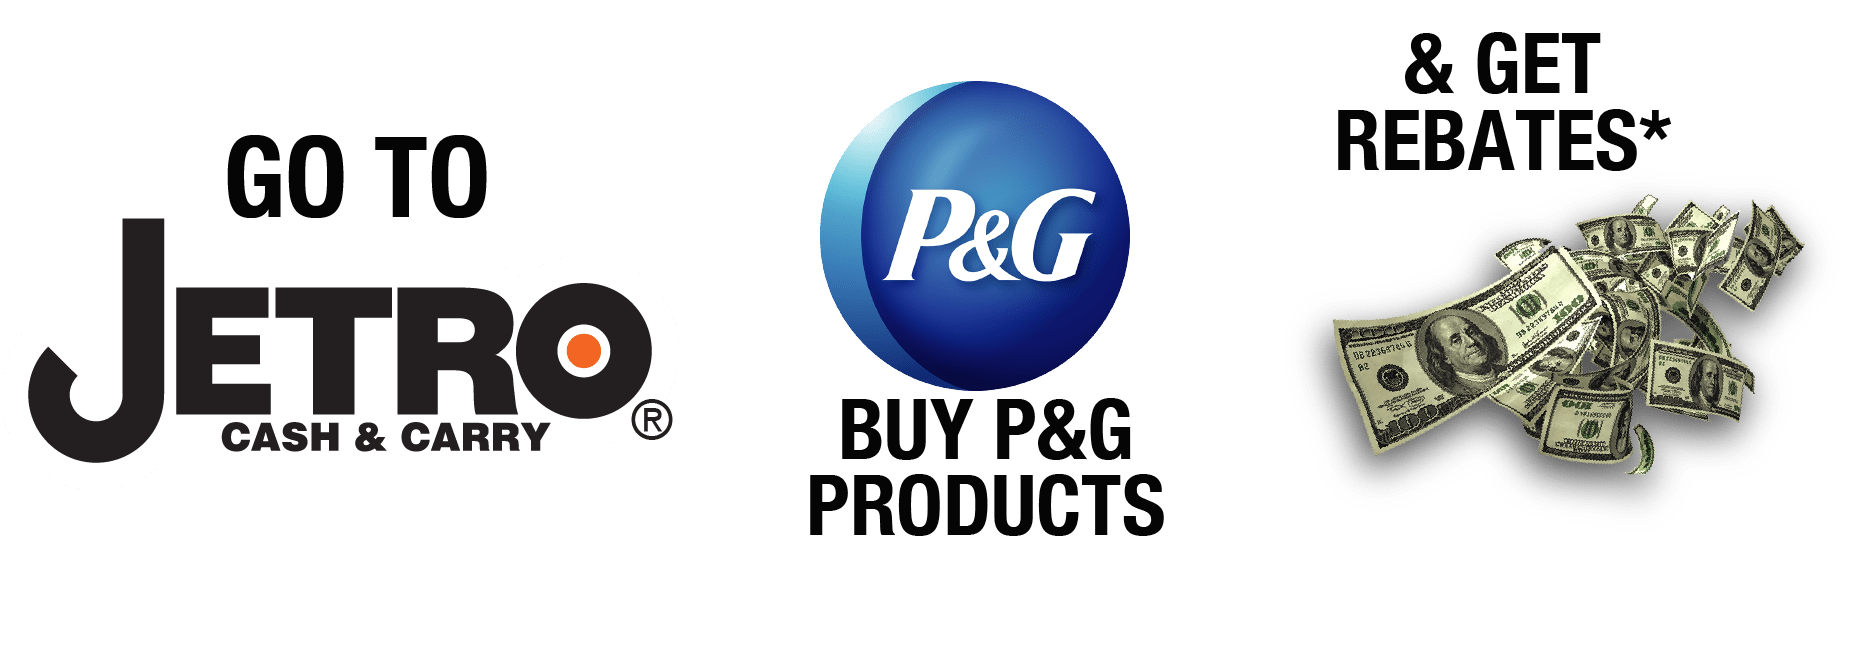 Jetro Logo - Jetro Special: Get a Rebate For P&G Purchases Made in Jetro ...